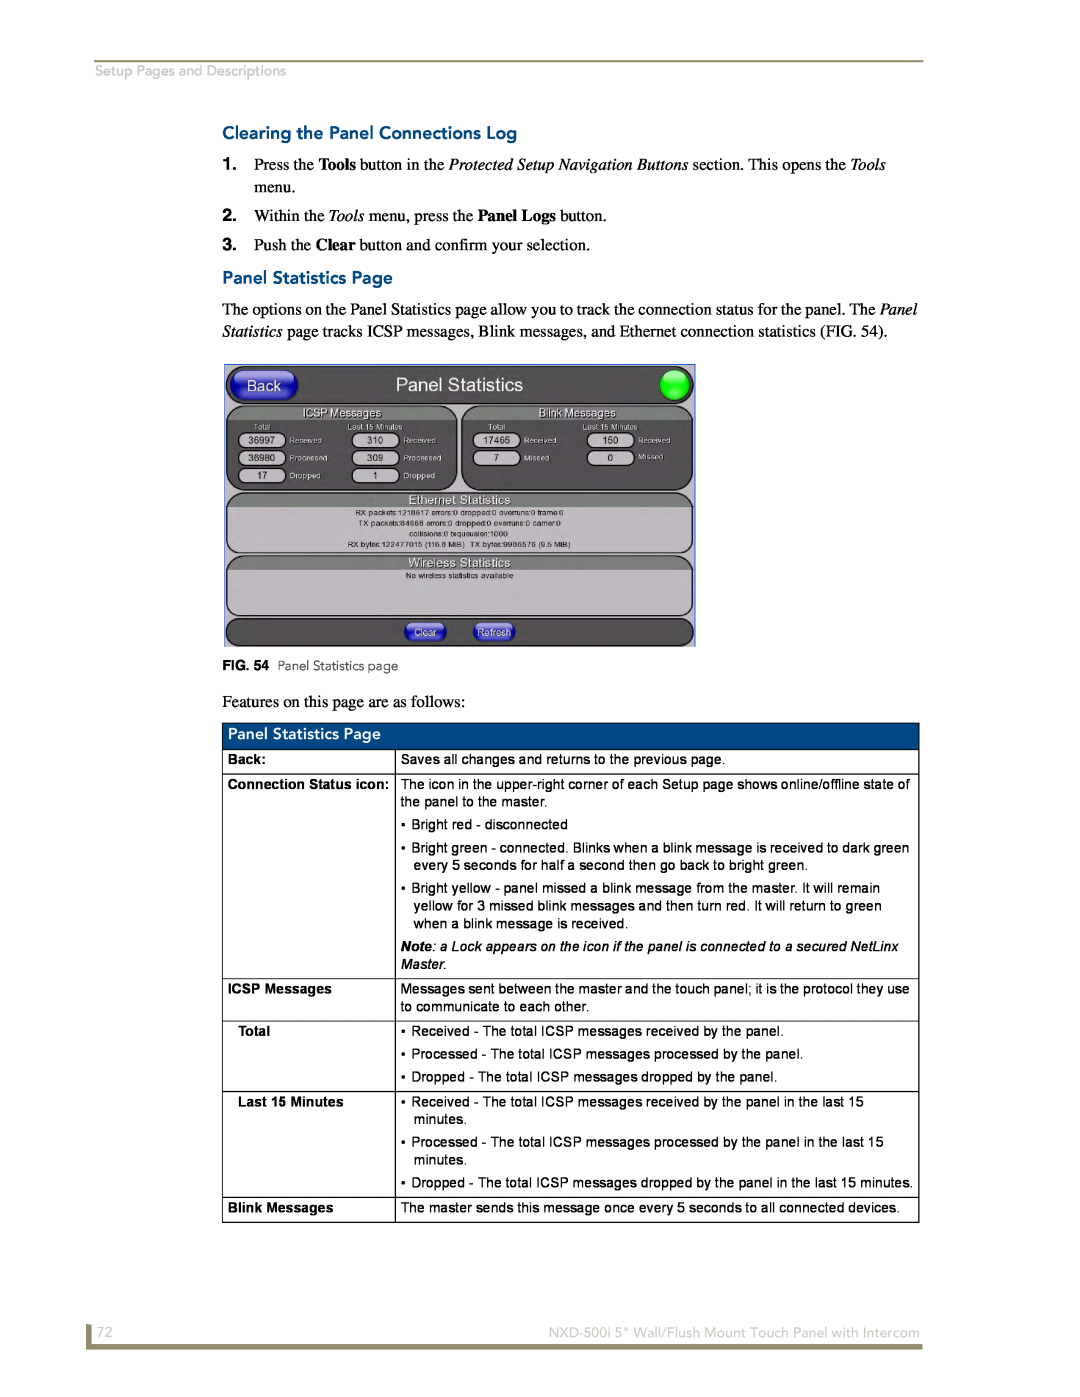 AMX NXD-500i manual Clearing the Panel Connections Log, Panel Statistics Page, Setup Pages and Descriptions, Master 